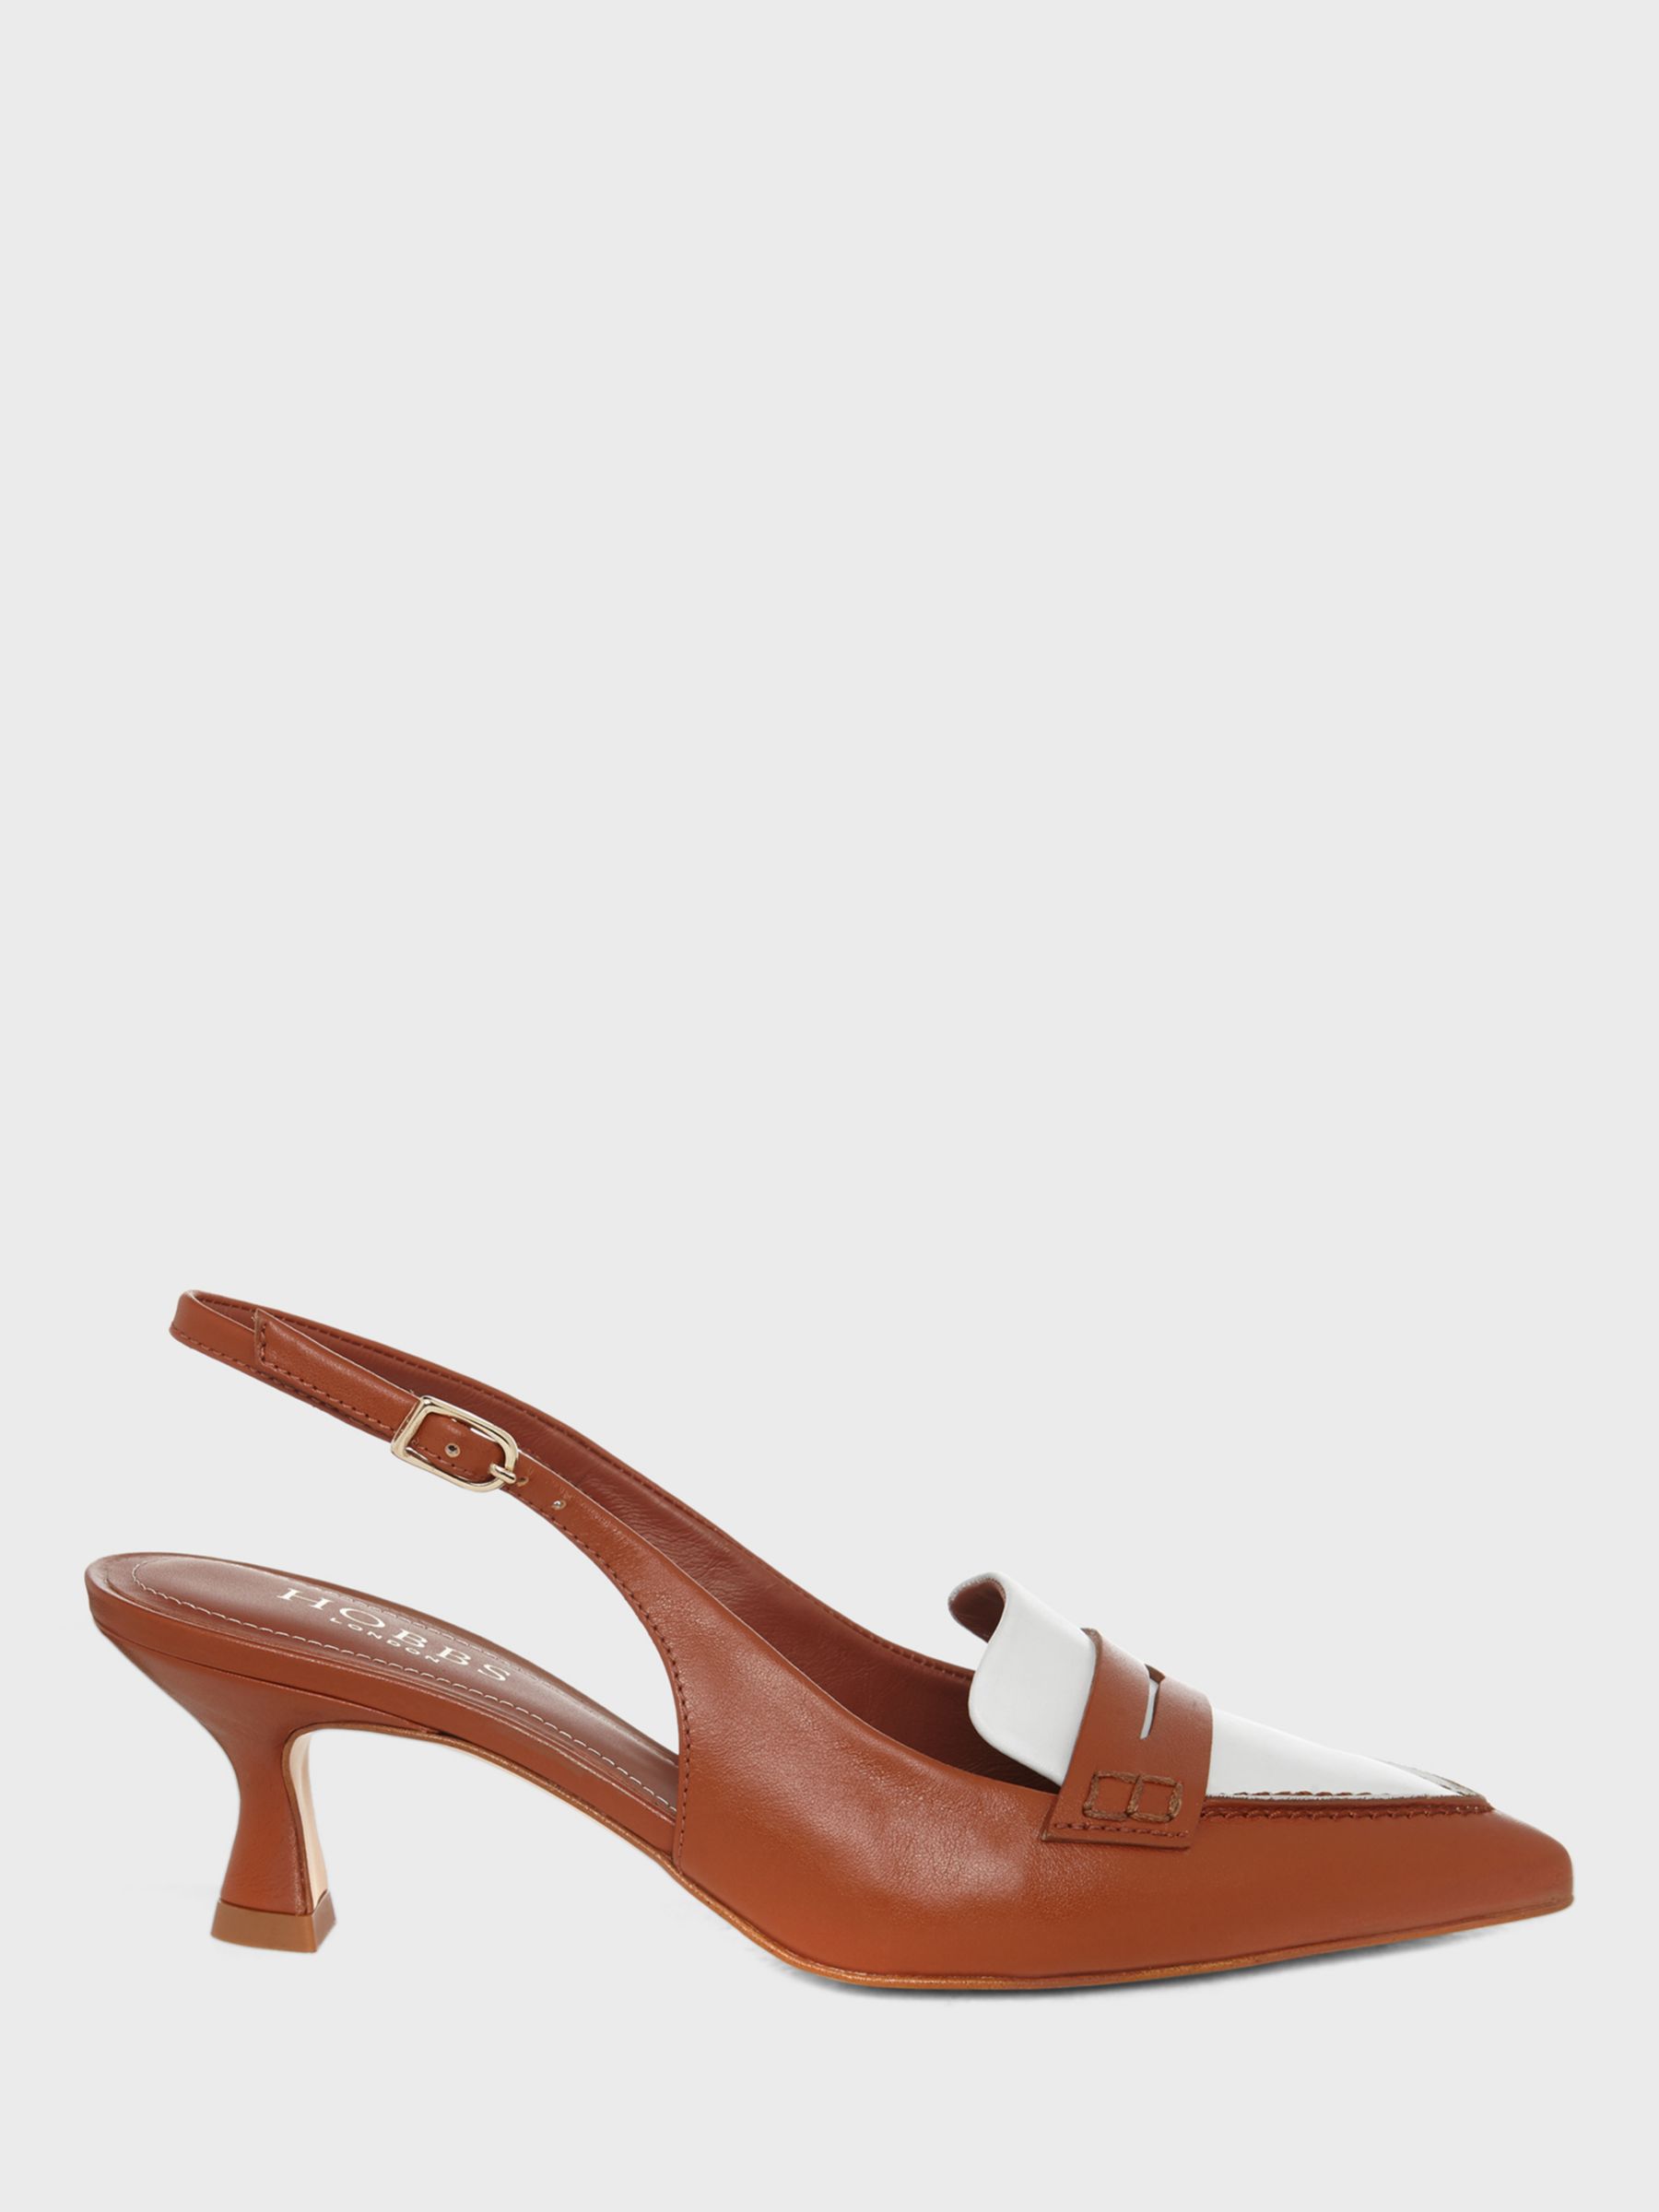 Hobbs Mischa Slingback Leather Court Shoes, Tan Ivory at John Lewis ...